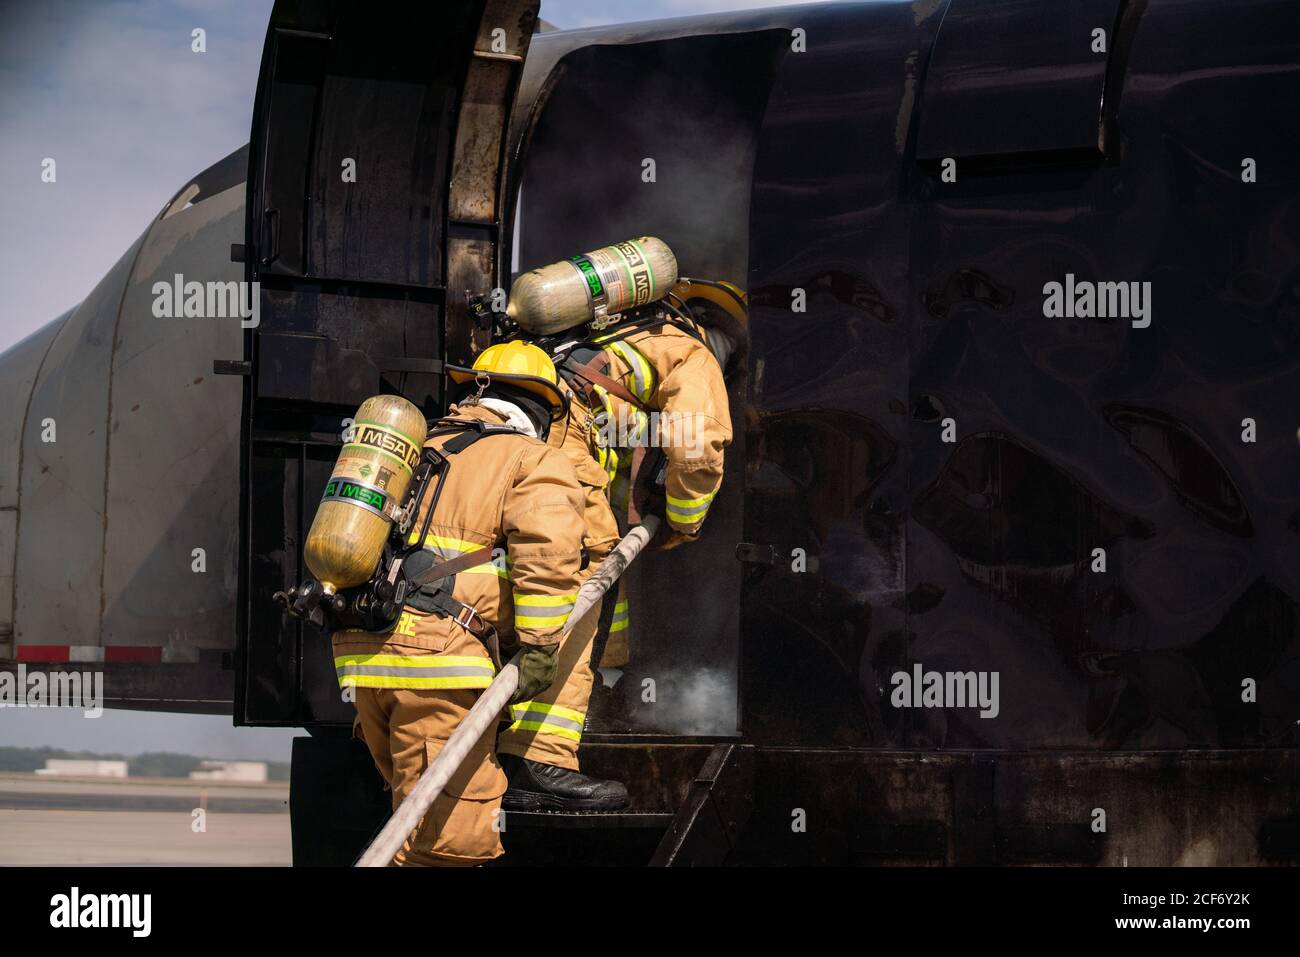 Firefighters assigned to the 139th Fire Emergency Services, Missouri Air National Guard, battle a simulated aircraft fire on a mobile training plane, at Rosecrans Air National Guard Base, in St. Joseph, Missouri, August 30, 2020. This mobile training tool is facilitated by a joint partnership between the Department of Transportation, Federal Aviation Administration, and the University of Missouri’s Fire and Rescue Training Institute who brought the training plane to St. Joseph. (U.S. Air National Guard photo by Tech. Sgt. Patrick Evenson) Stock Photo